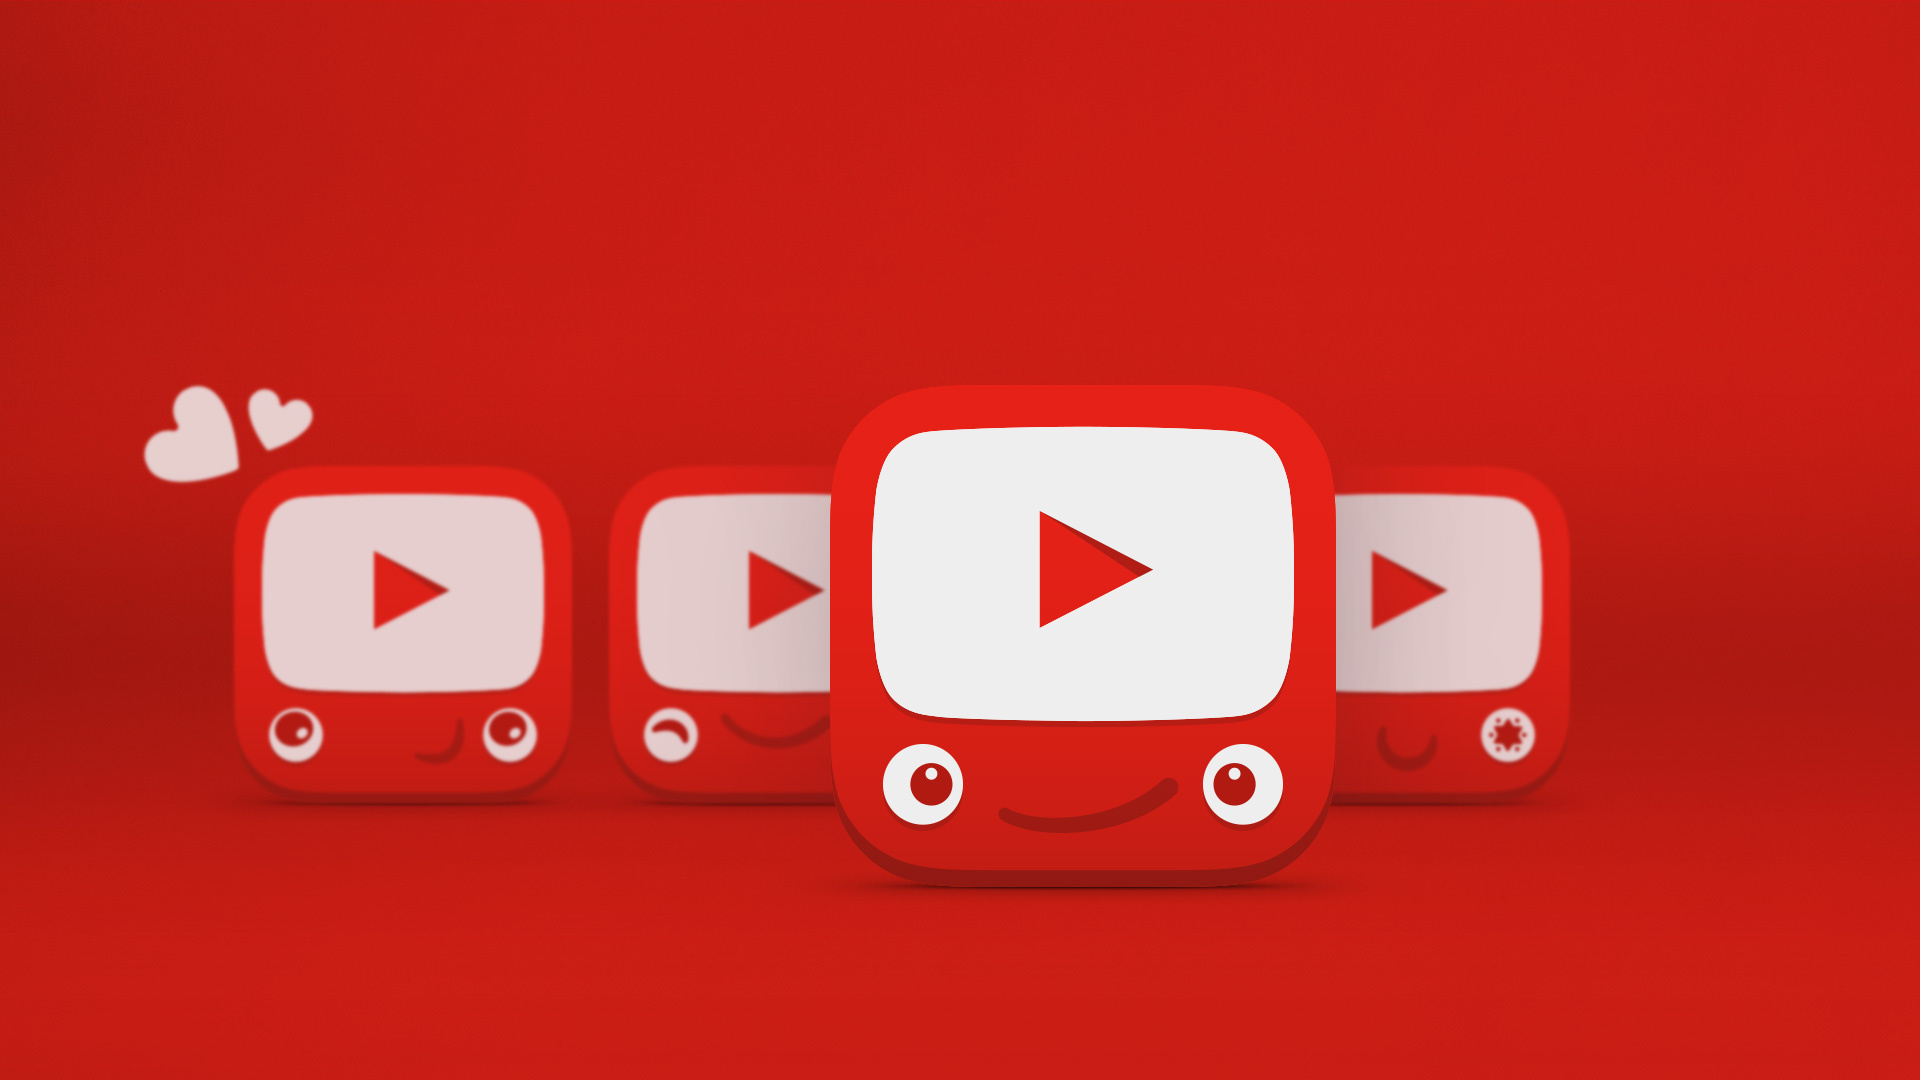 YouTube: An American video app and website for children developed by the subsidiary of Google. 1920x1080 Full HD Wallpaper.